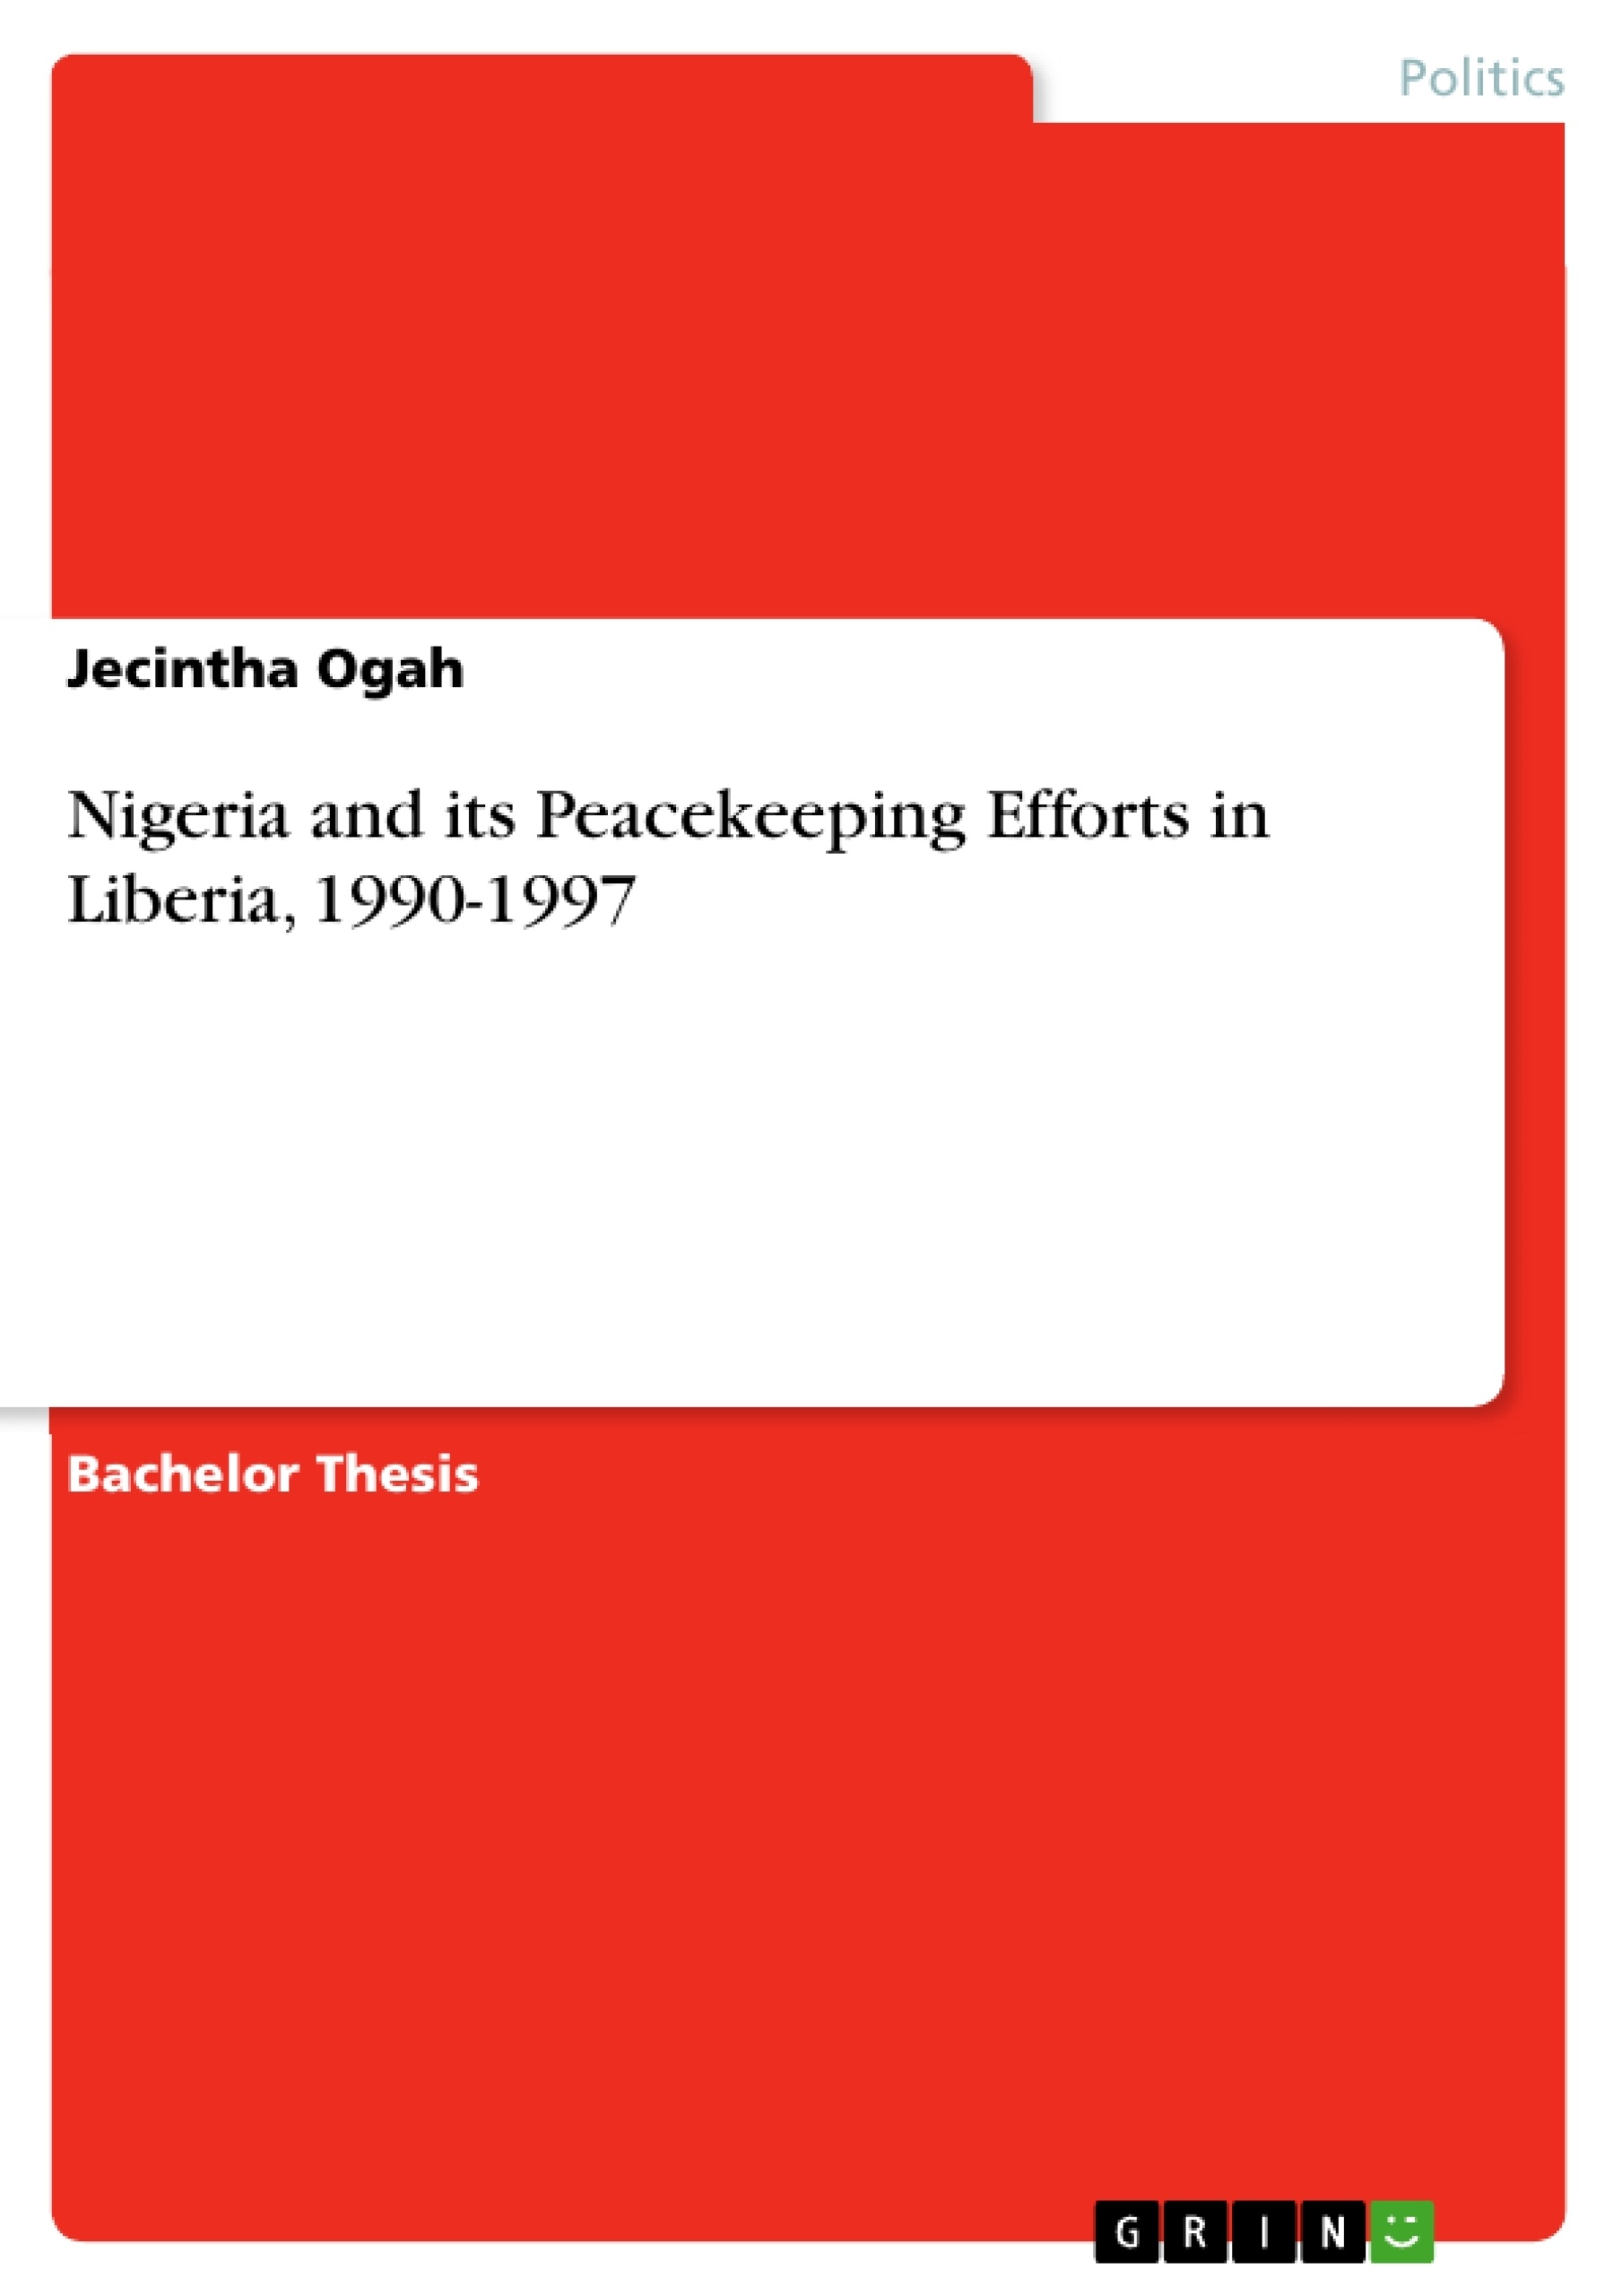 Title: Nigeria and its Peacekeeping Efforts in Liberia, 1990-1997